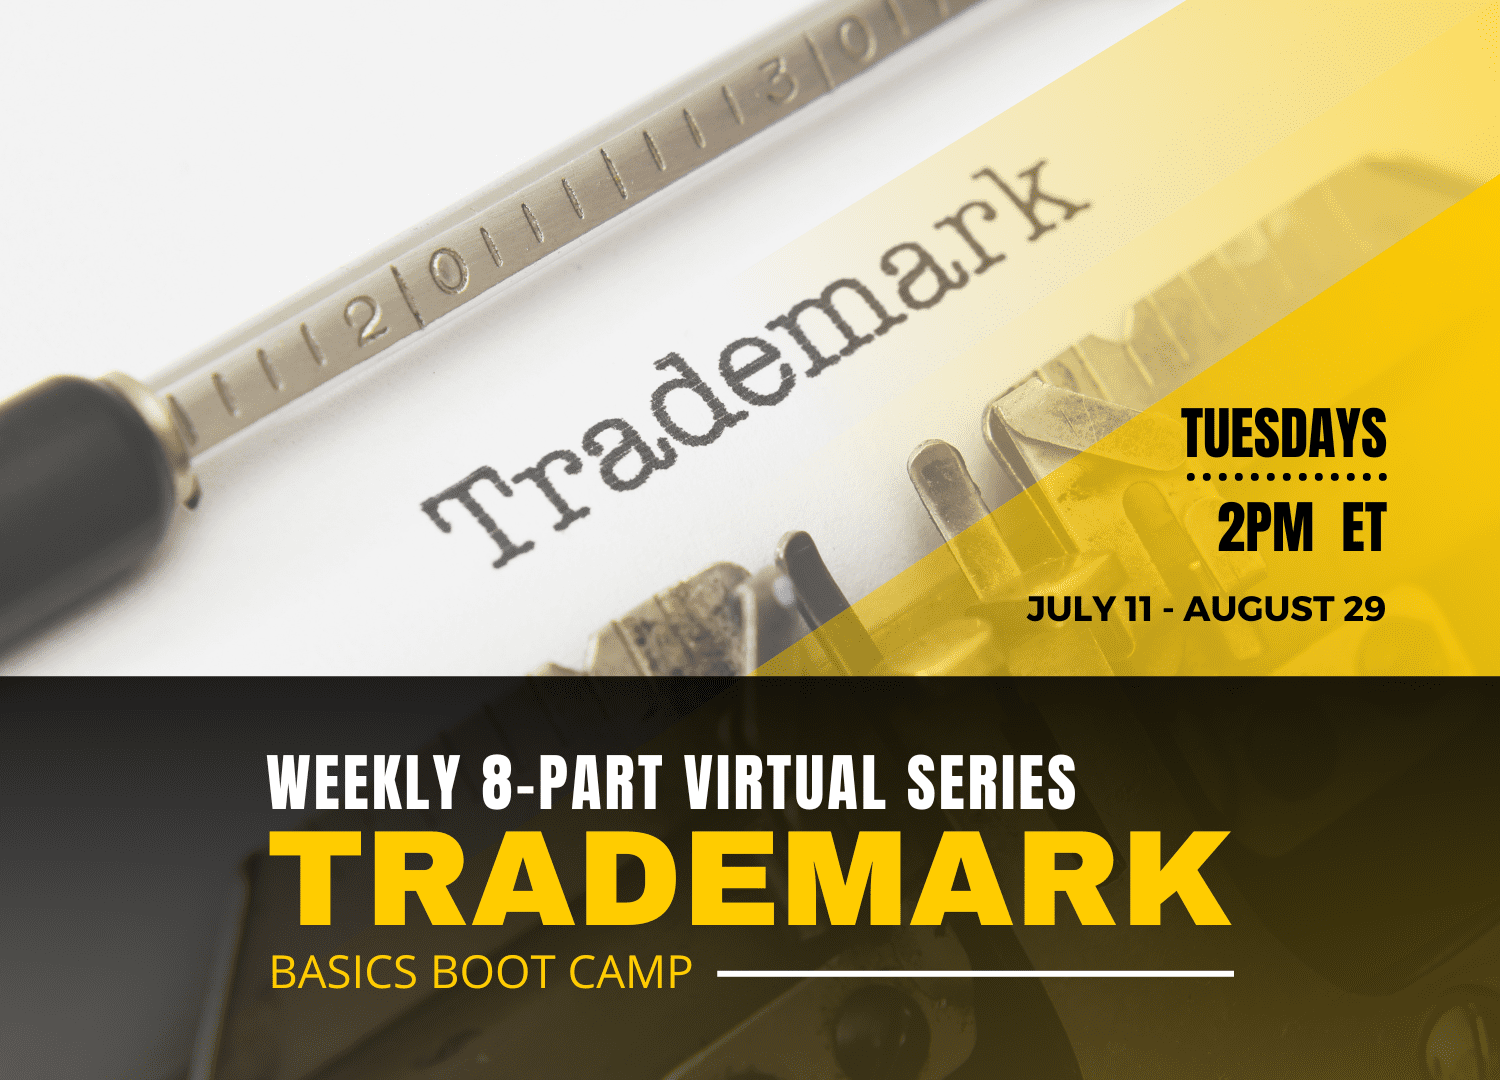 WEEKLY 8-PART Virtual SERIES TRADEMARK BASICS boot camp Tuesdays 2pm et July 11 - AUgust 29